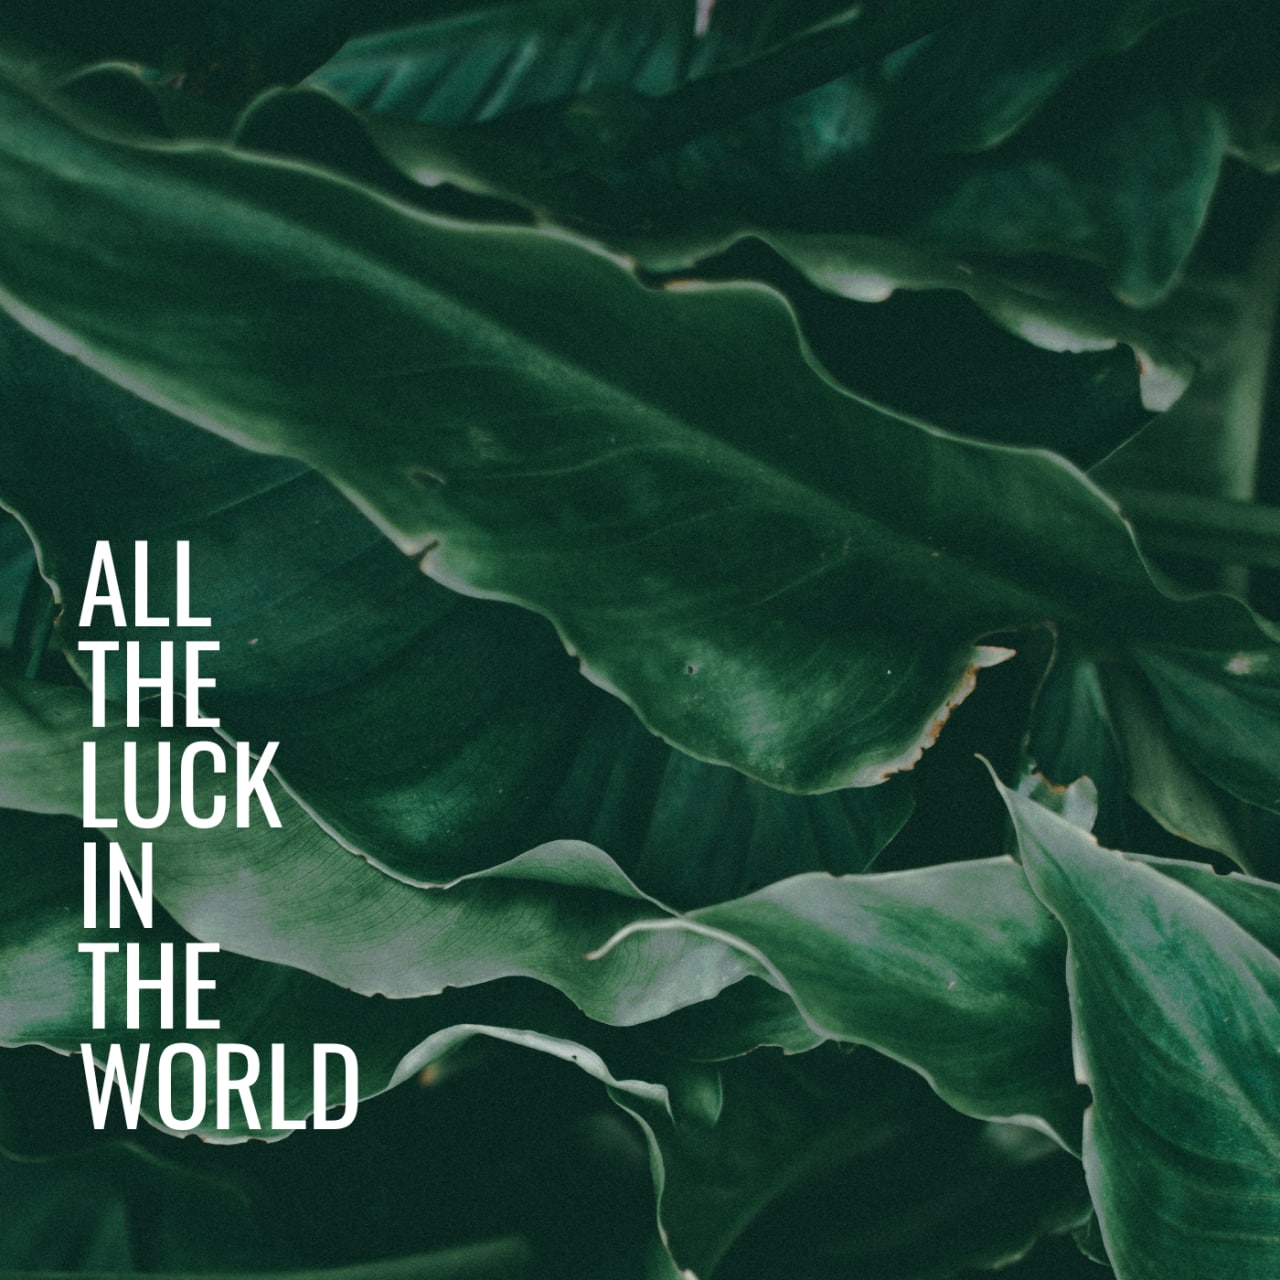 All The Luck In The World (feat. Skrillex) by Colin Stauber